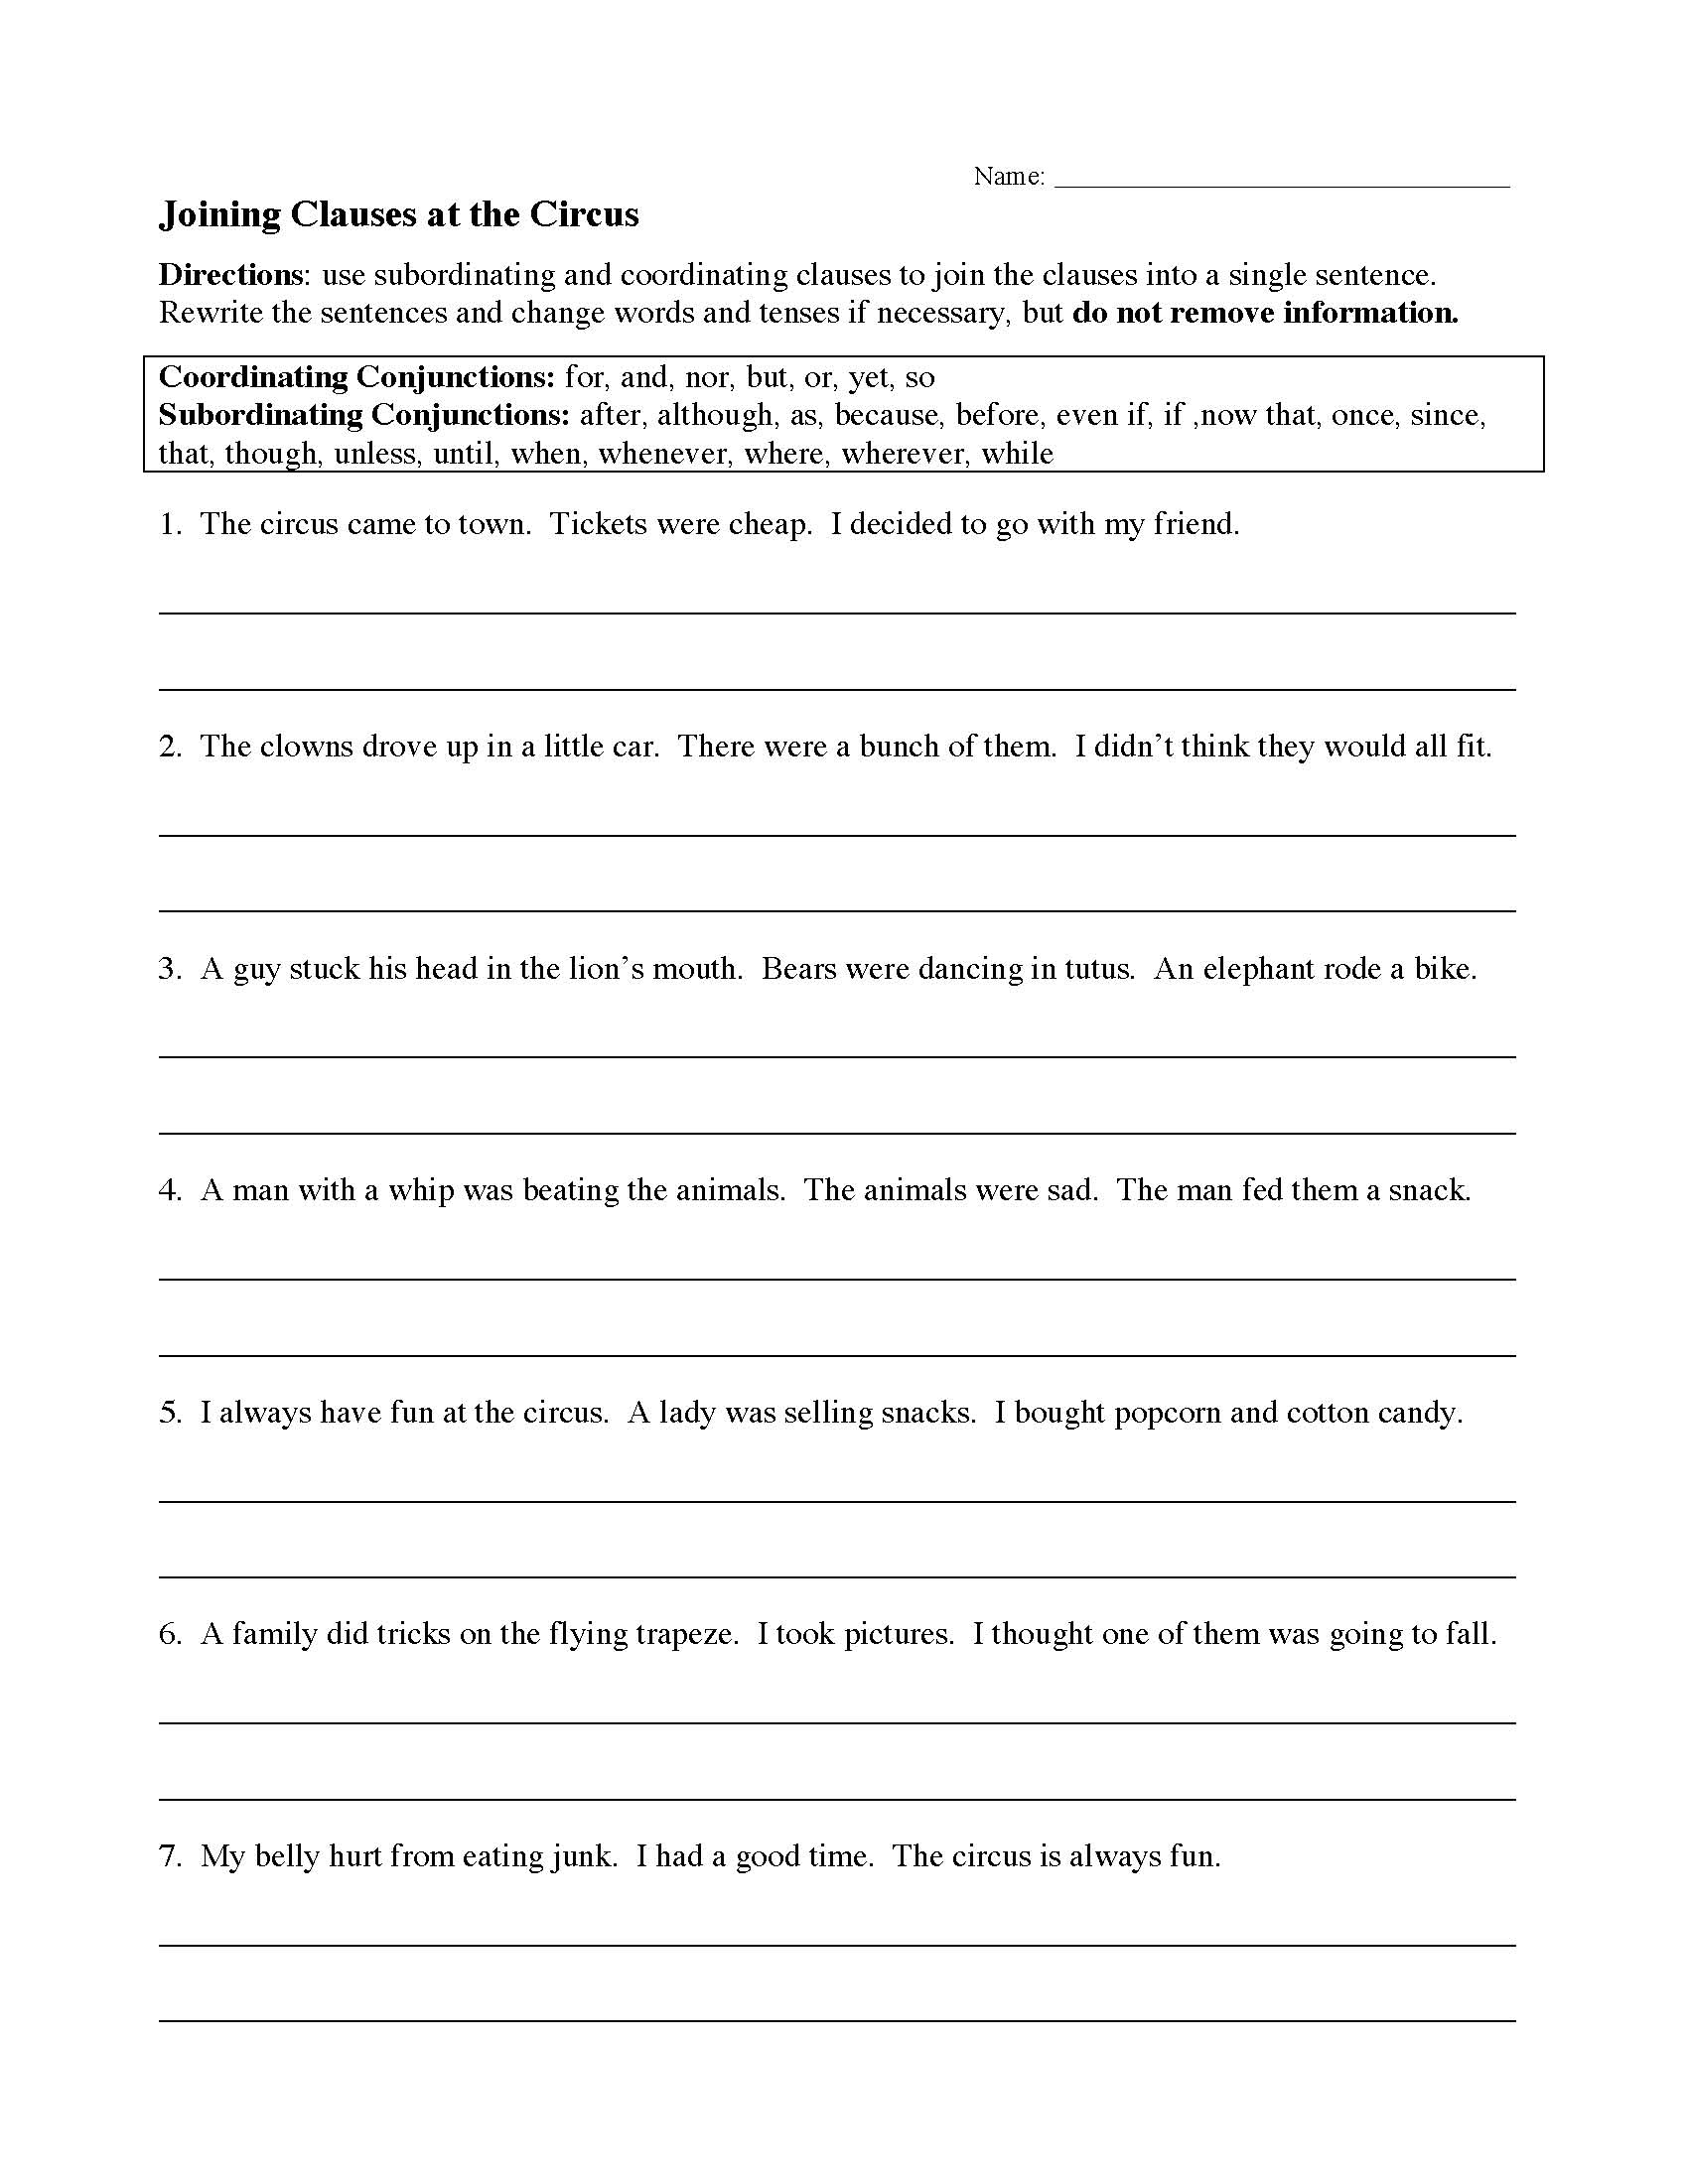 clauses-and-phrases-language-arts-worksheets-and-activities